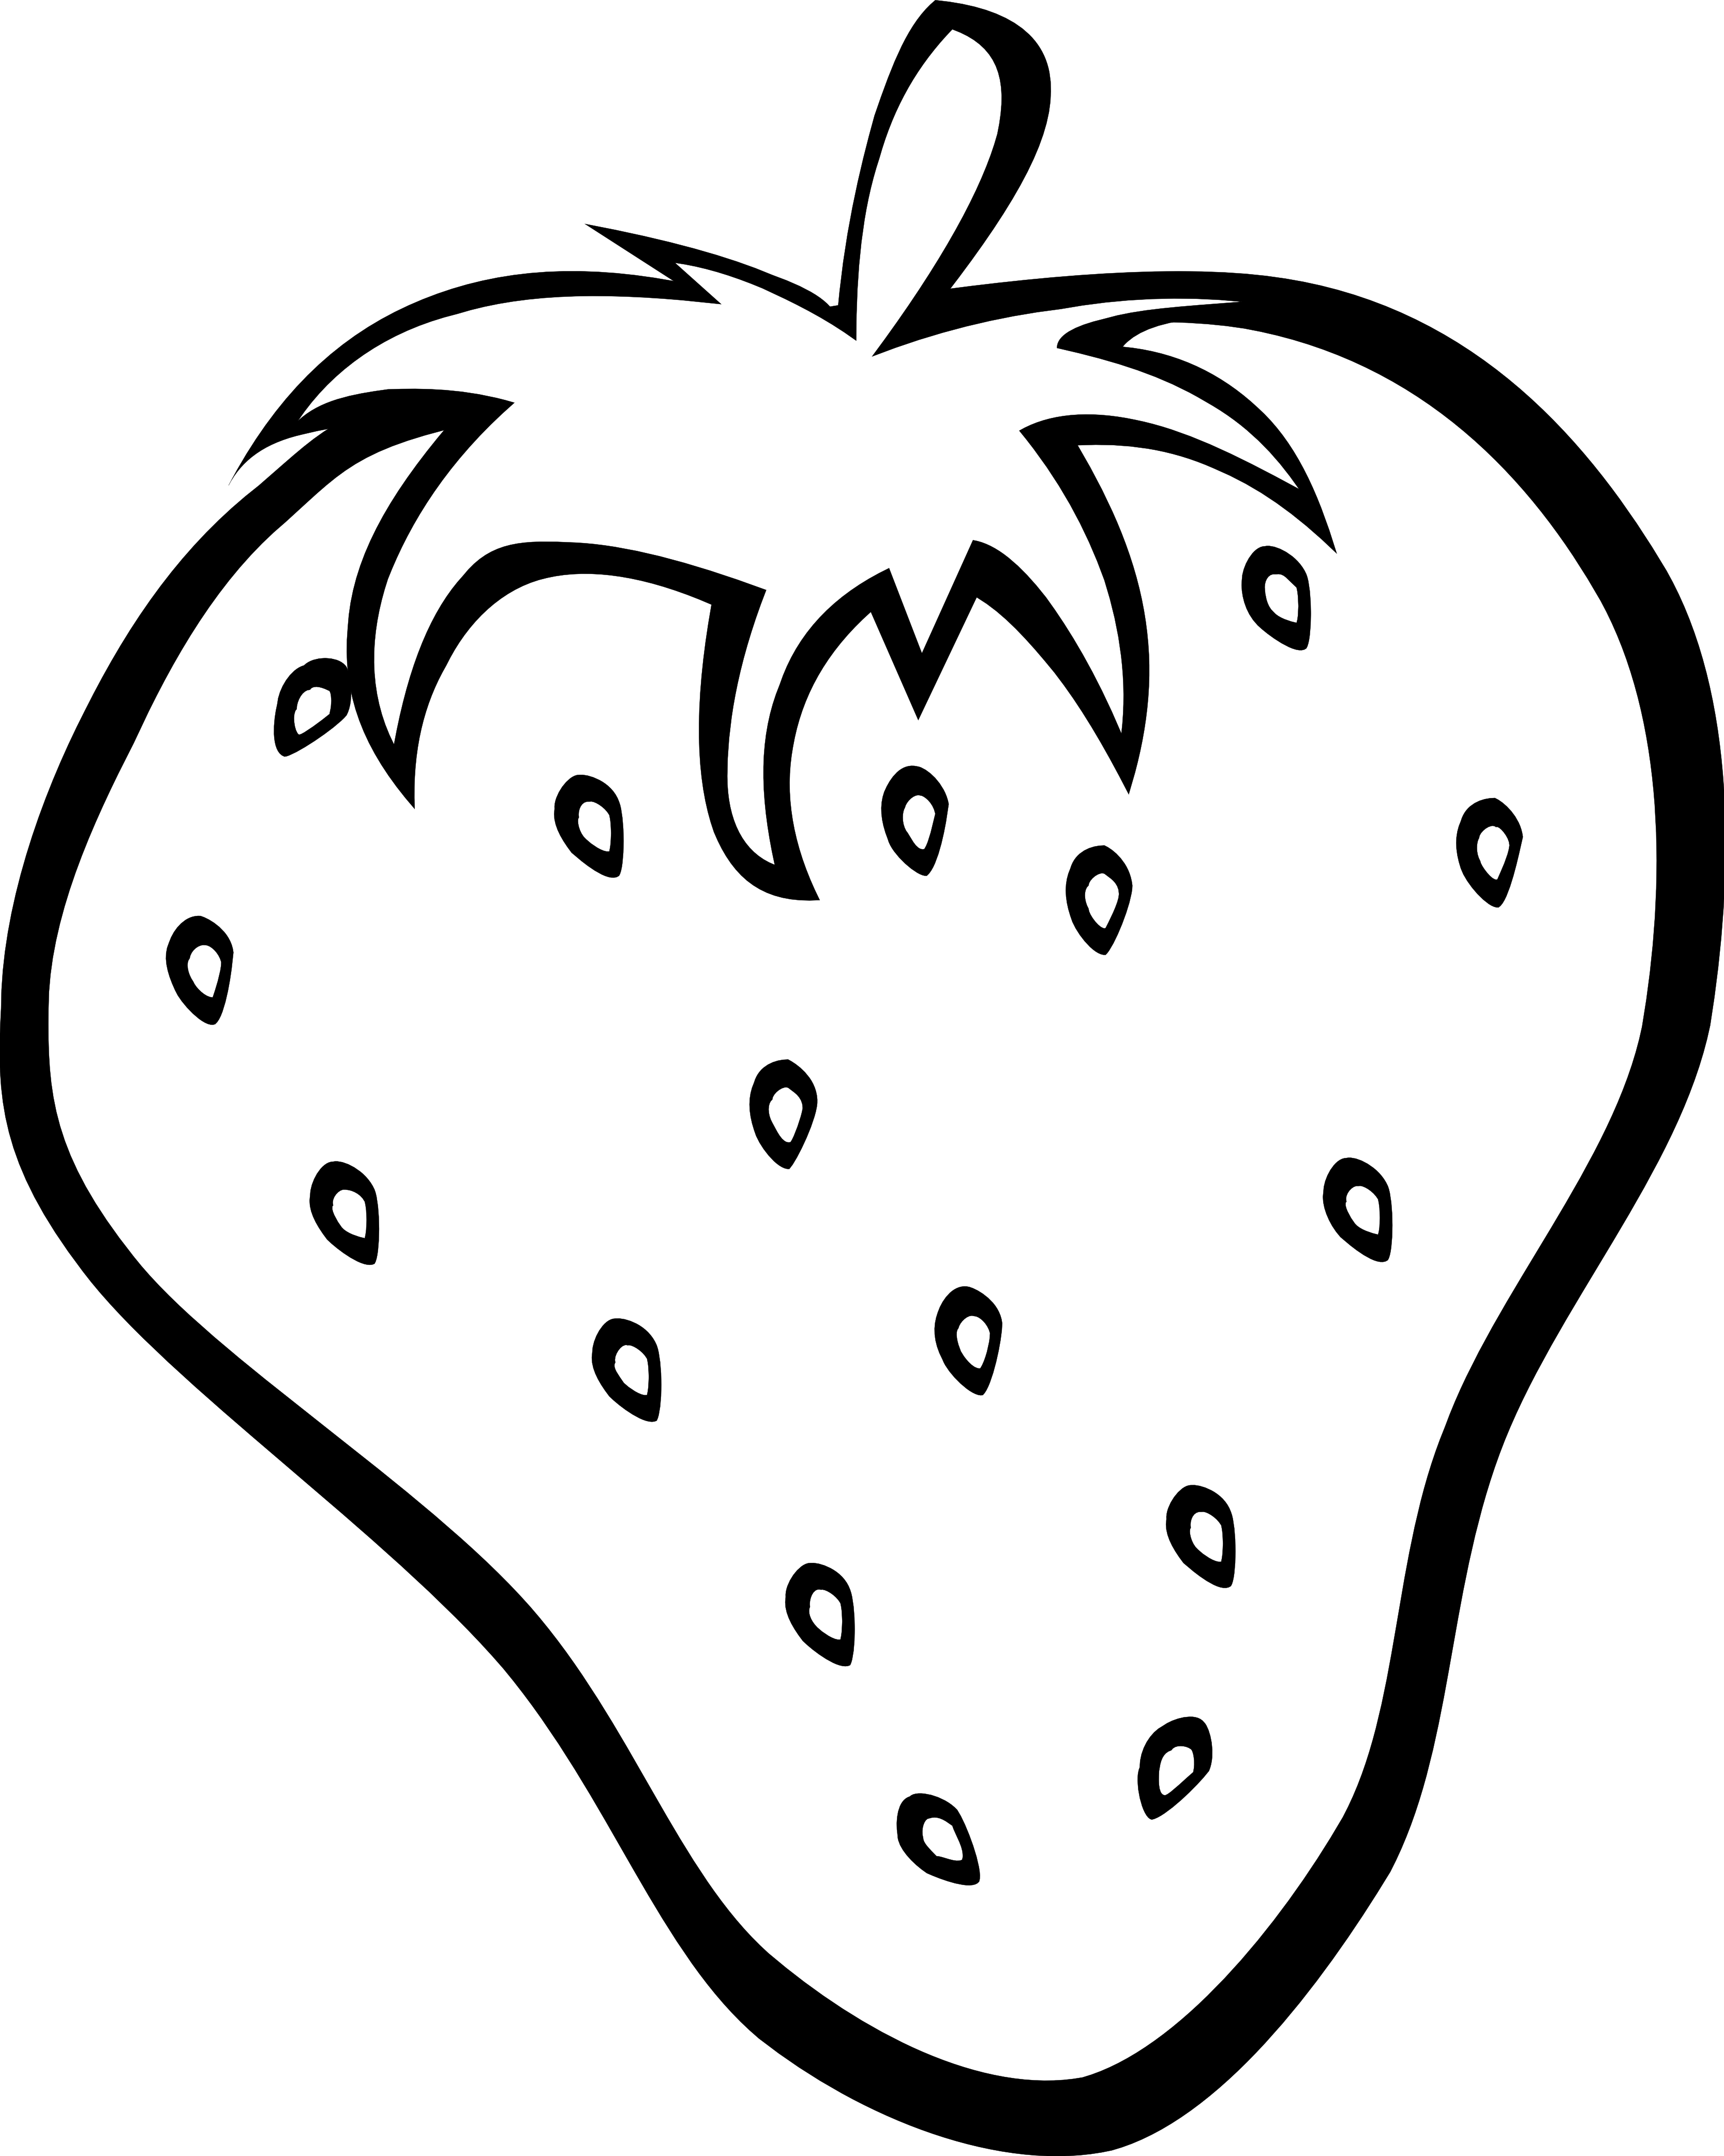 Fruits Images For Drawing - ClipArt Best